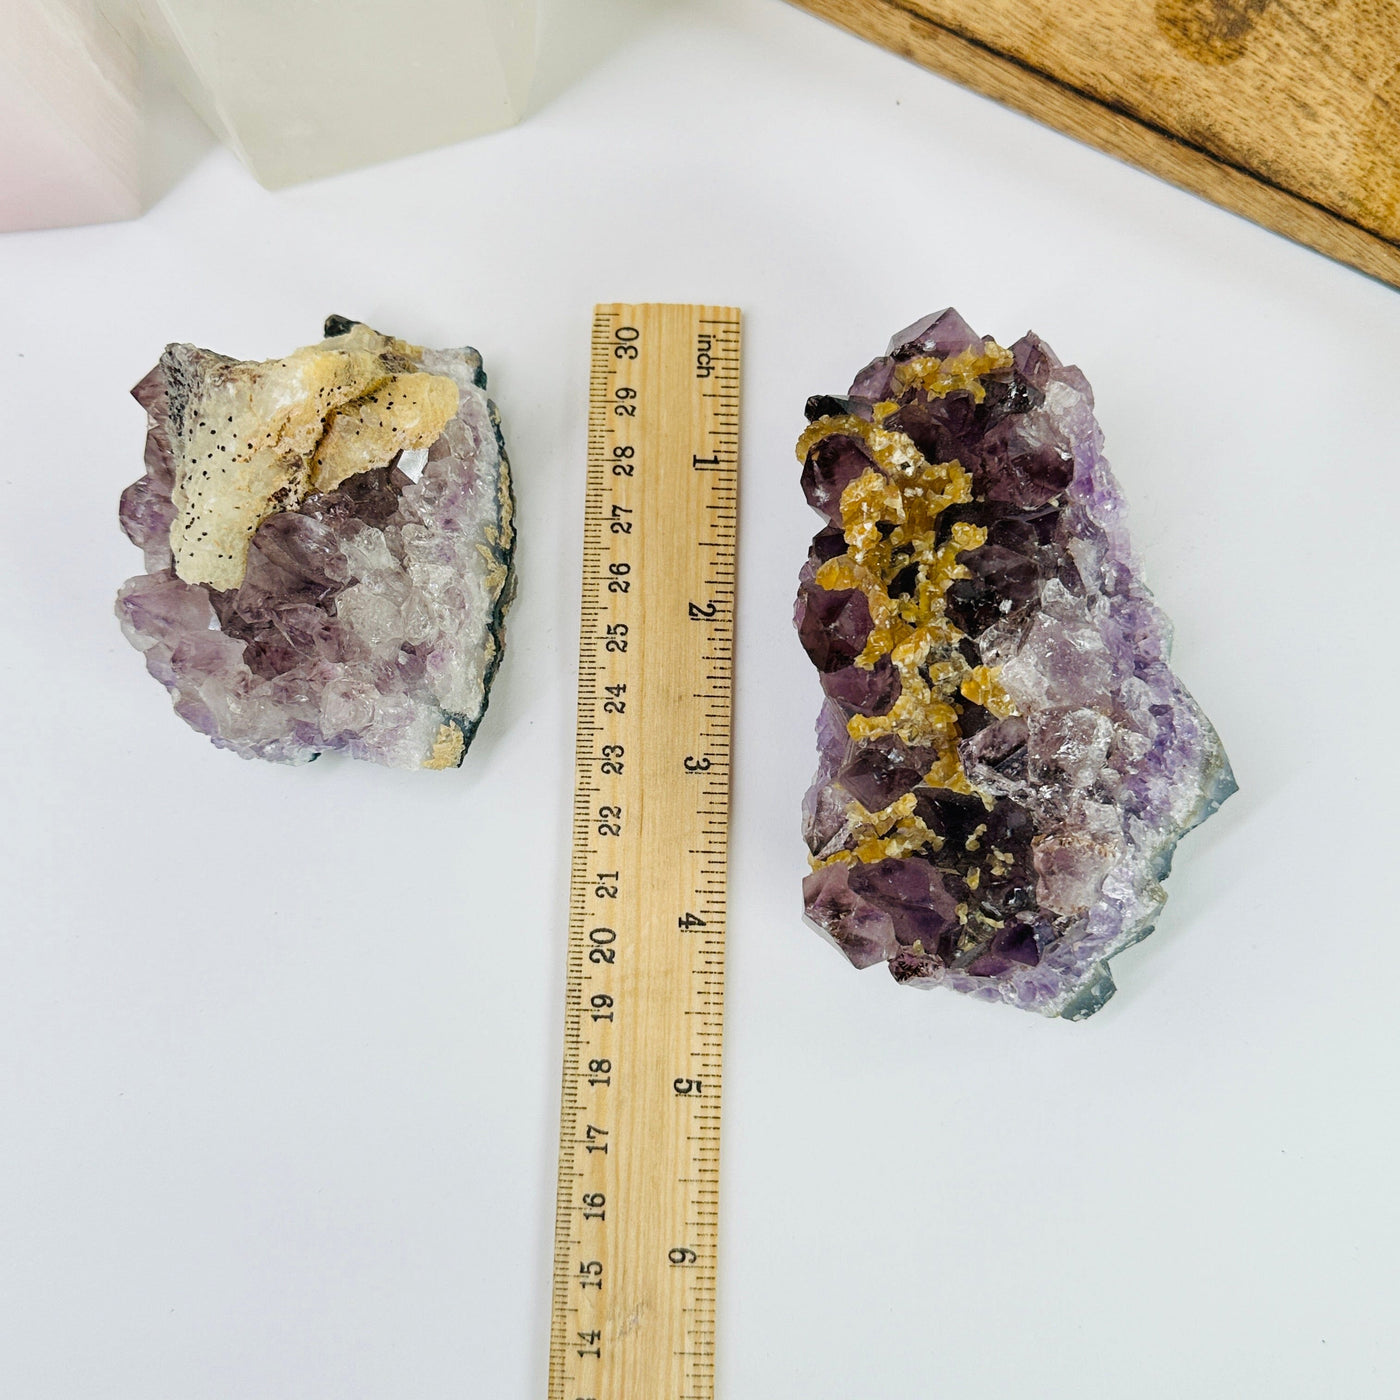 AMETHYST CLUSTER next to a ruler for size reference